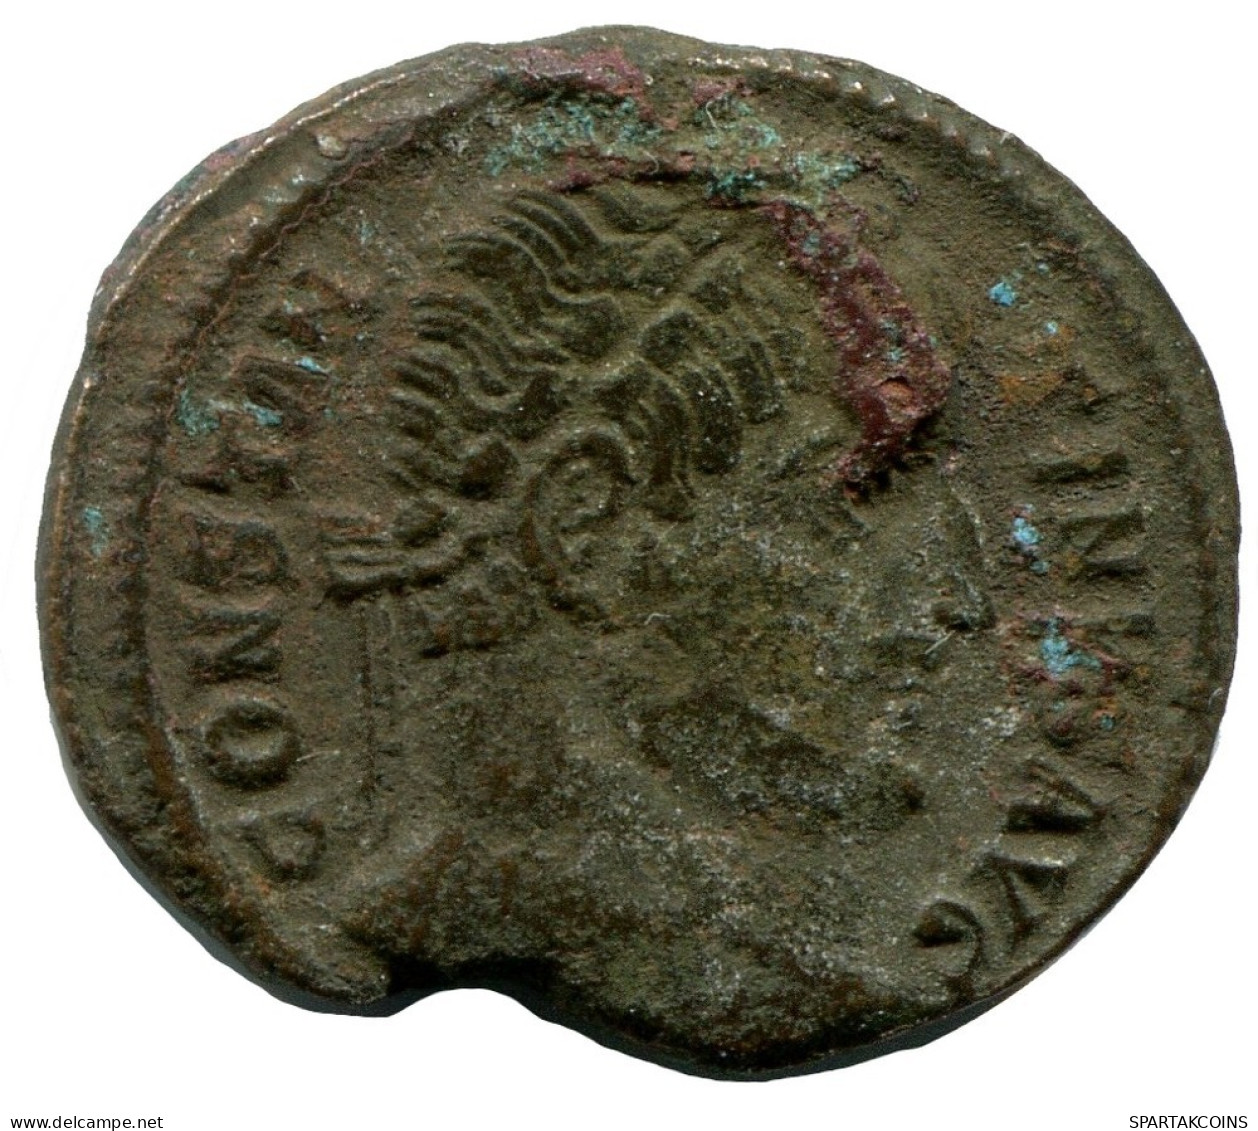 CONSTANTINE I MINTED IN ANTIOCH FOUND IN IHNASYAH HOARD EGYPT #ANC10613.14.D.A - The Christian Empire (307 AD Tot 363 AD)